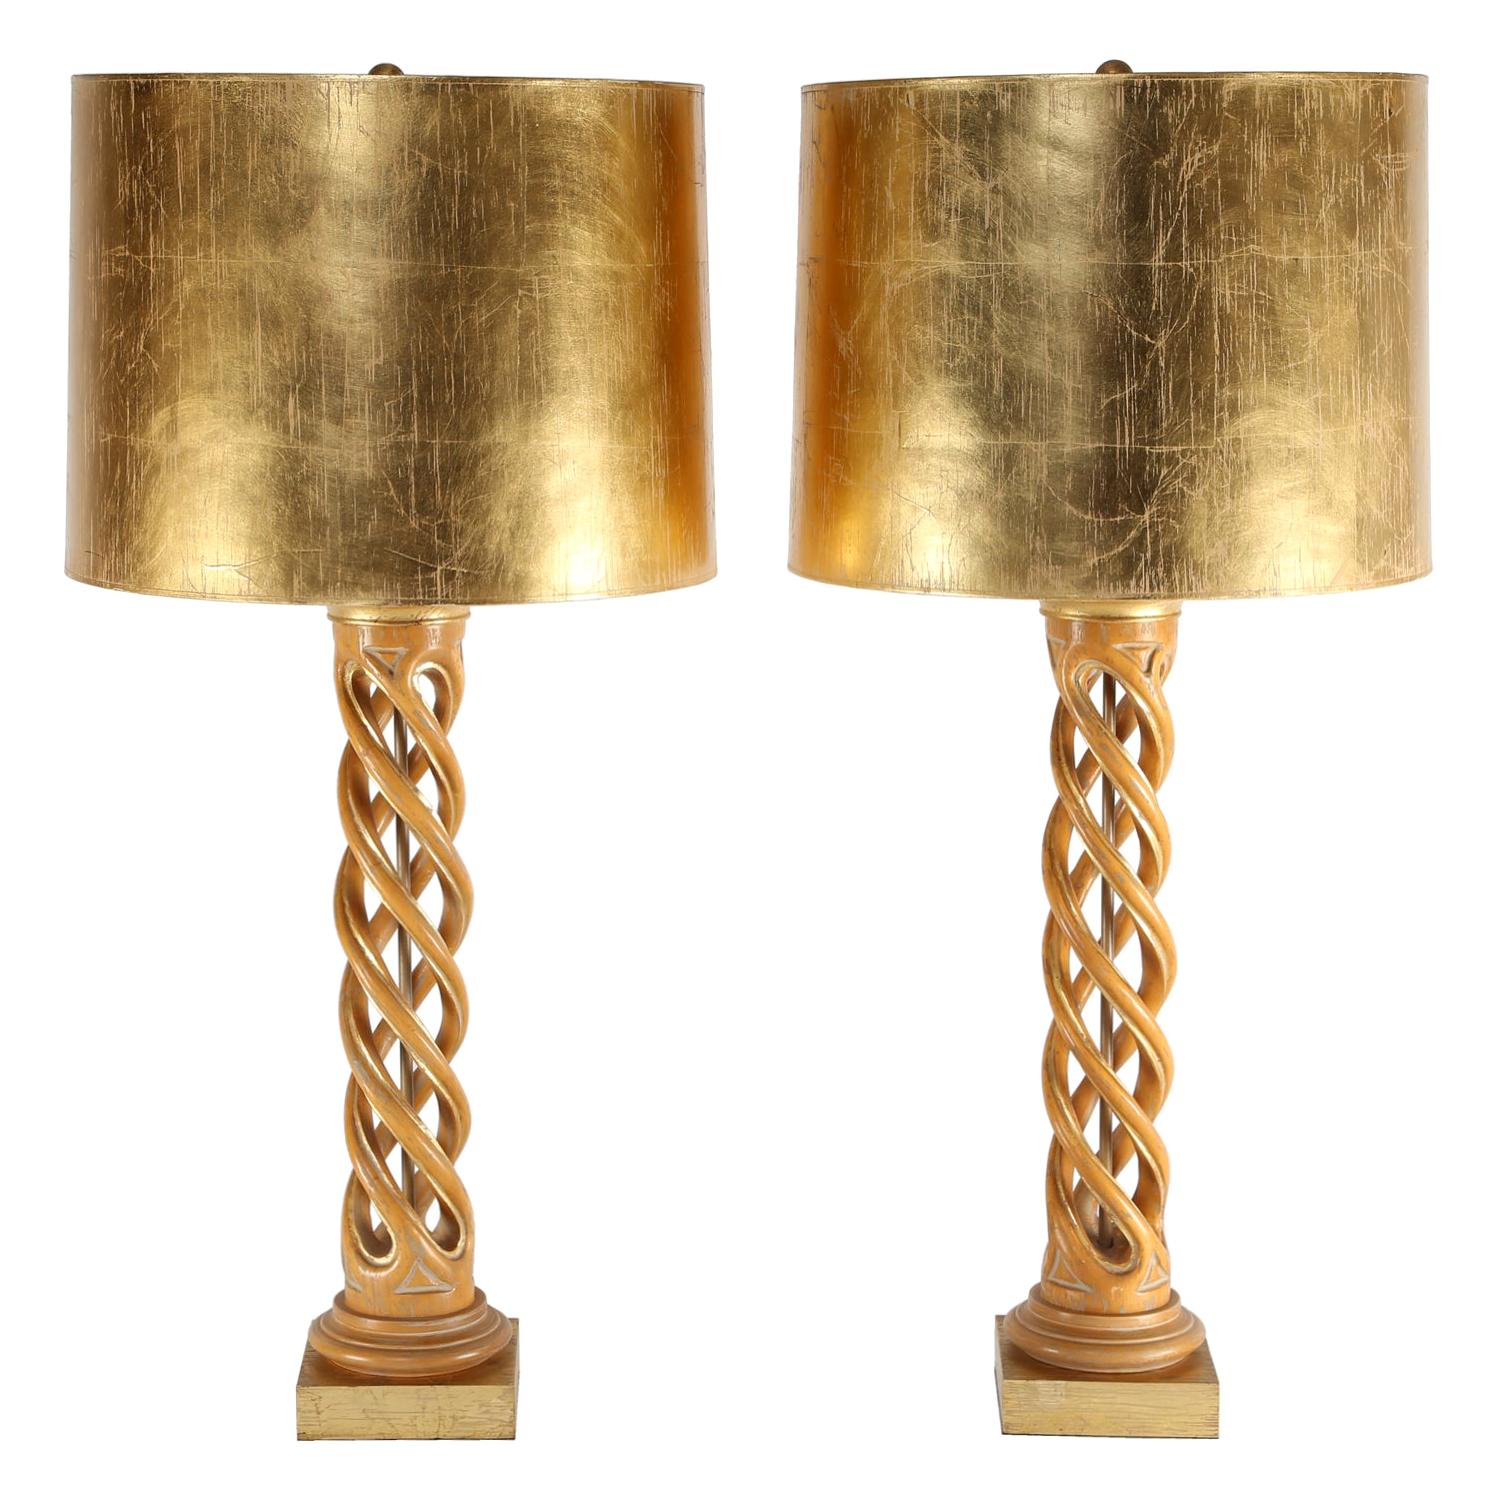 Pair of Monumental Table Lamps in Bleached Mahogany with Gilt Shades, 1950s For Sale